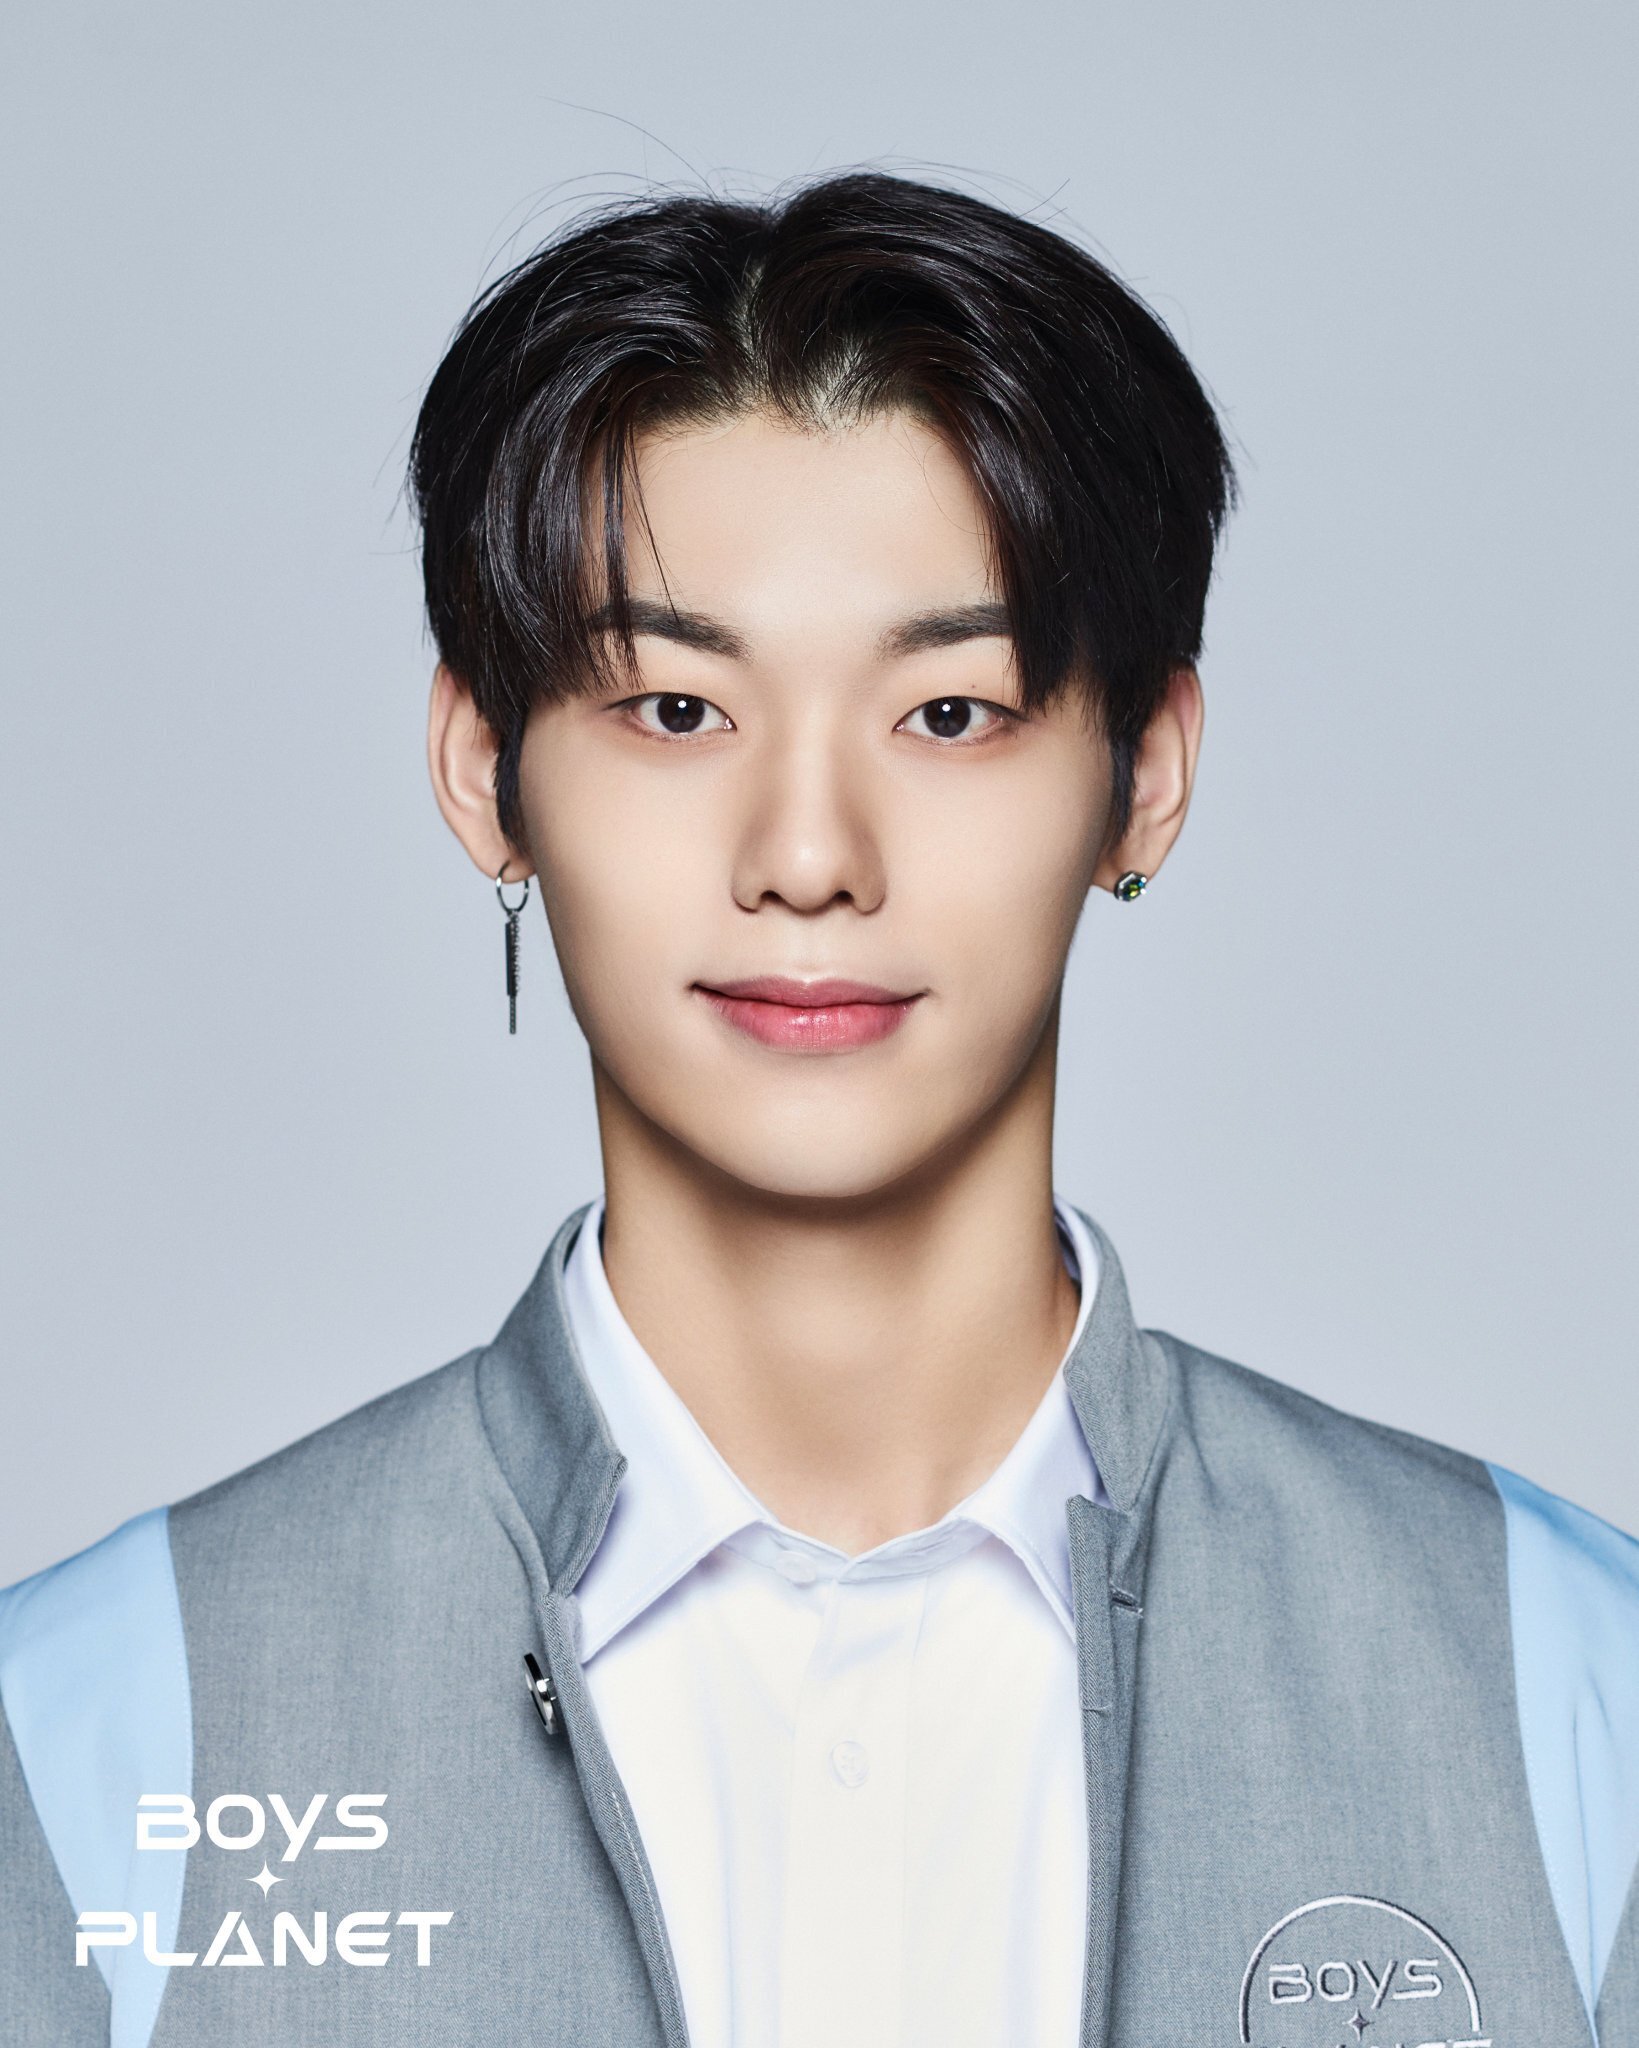 Boys Planet 2023 profile - K group - Lee Jeong Hyeon | kpopping